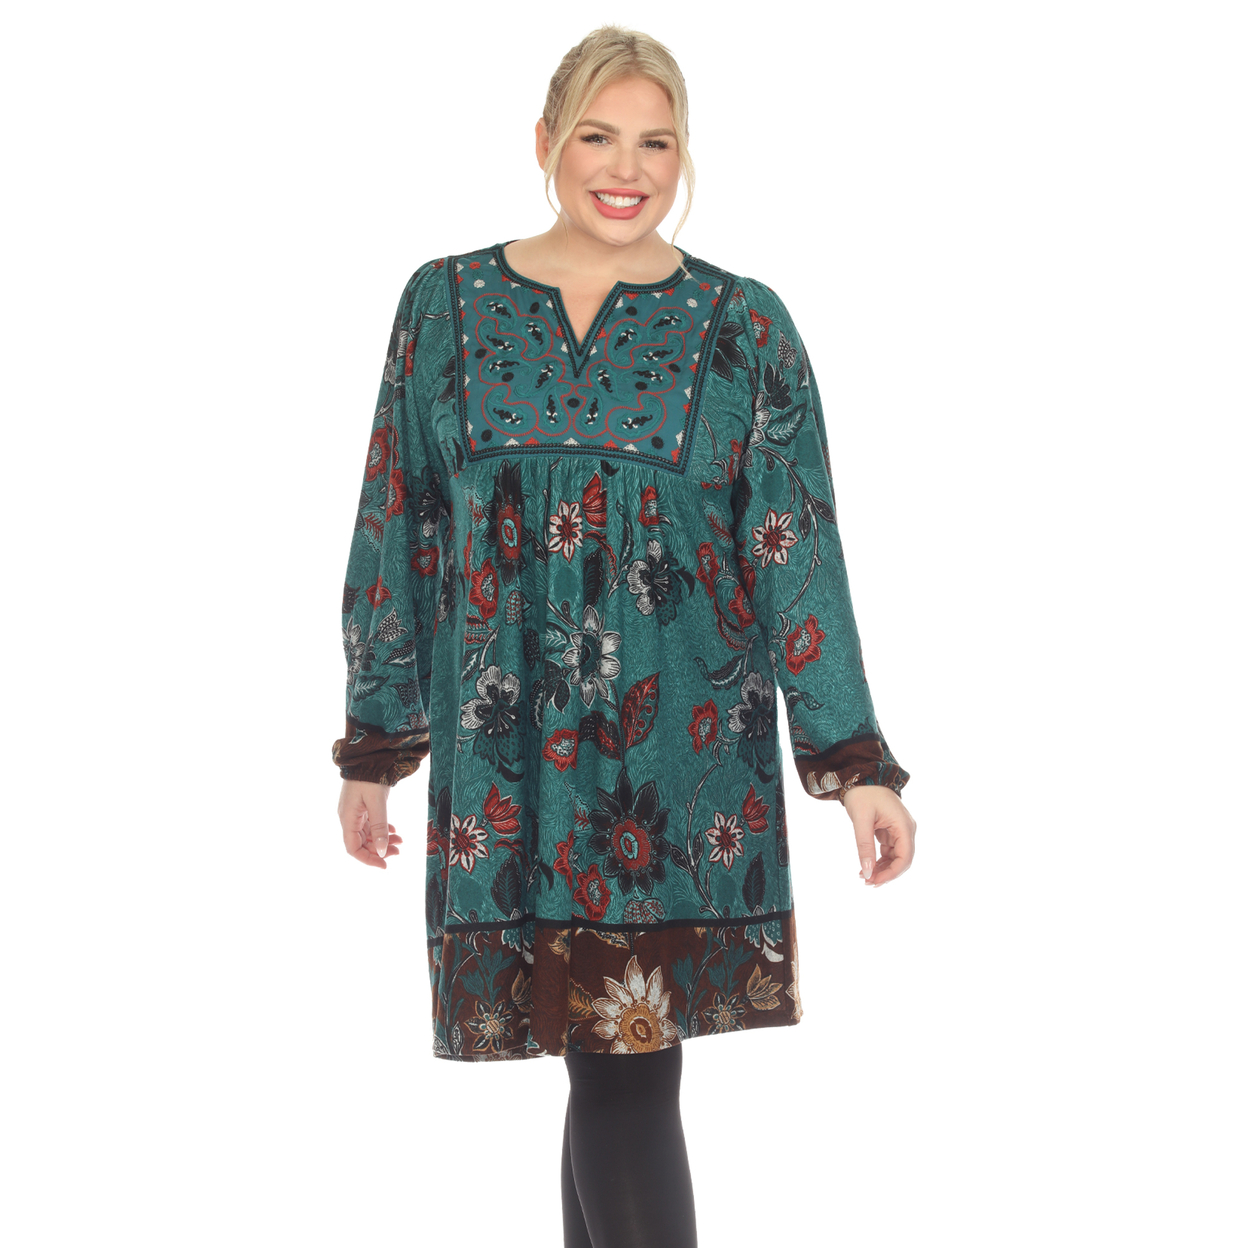 White Mark Women's Floral Paisley Sweater Dress - Teal, 3x